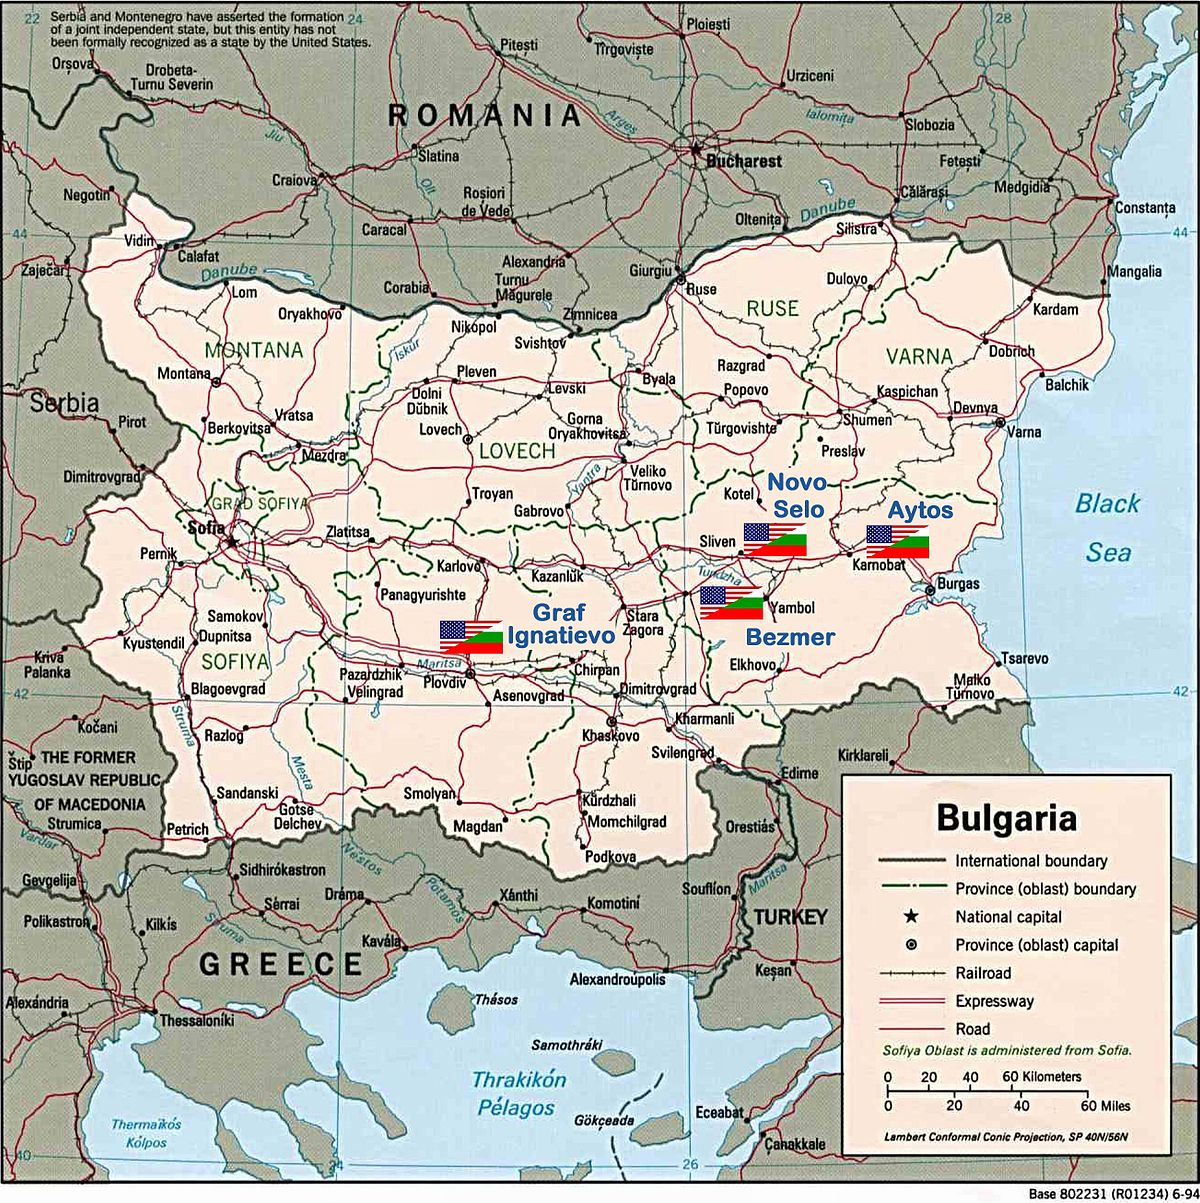 US military bases in Bulgaria